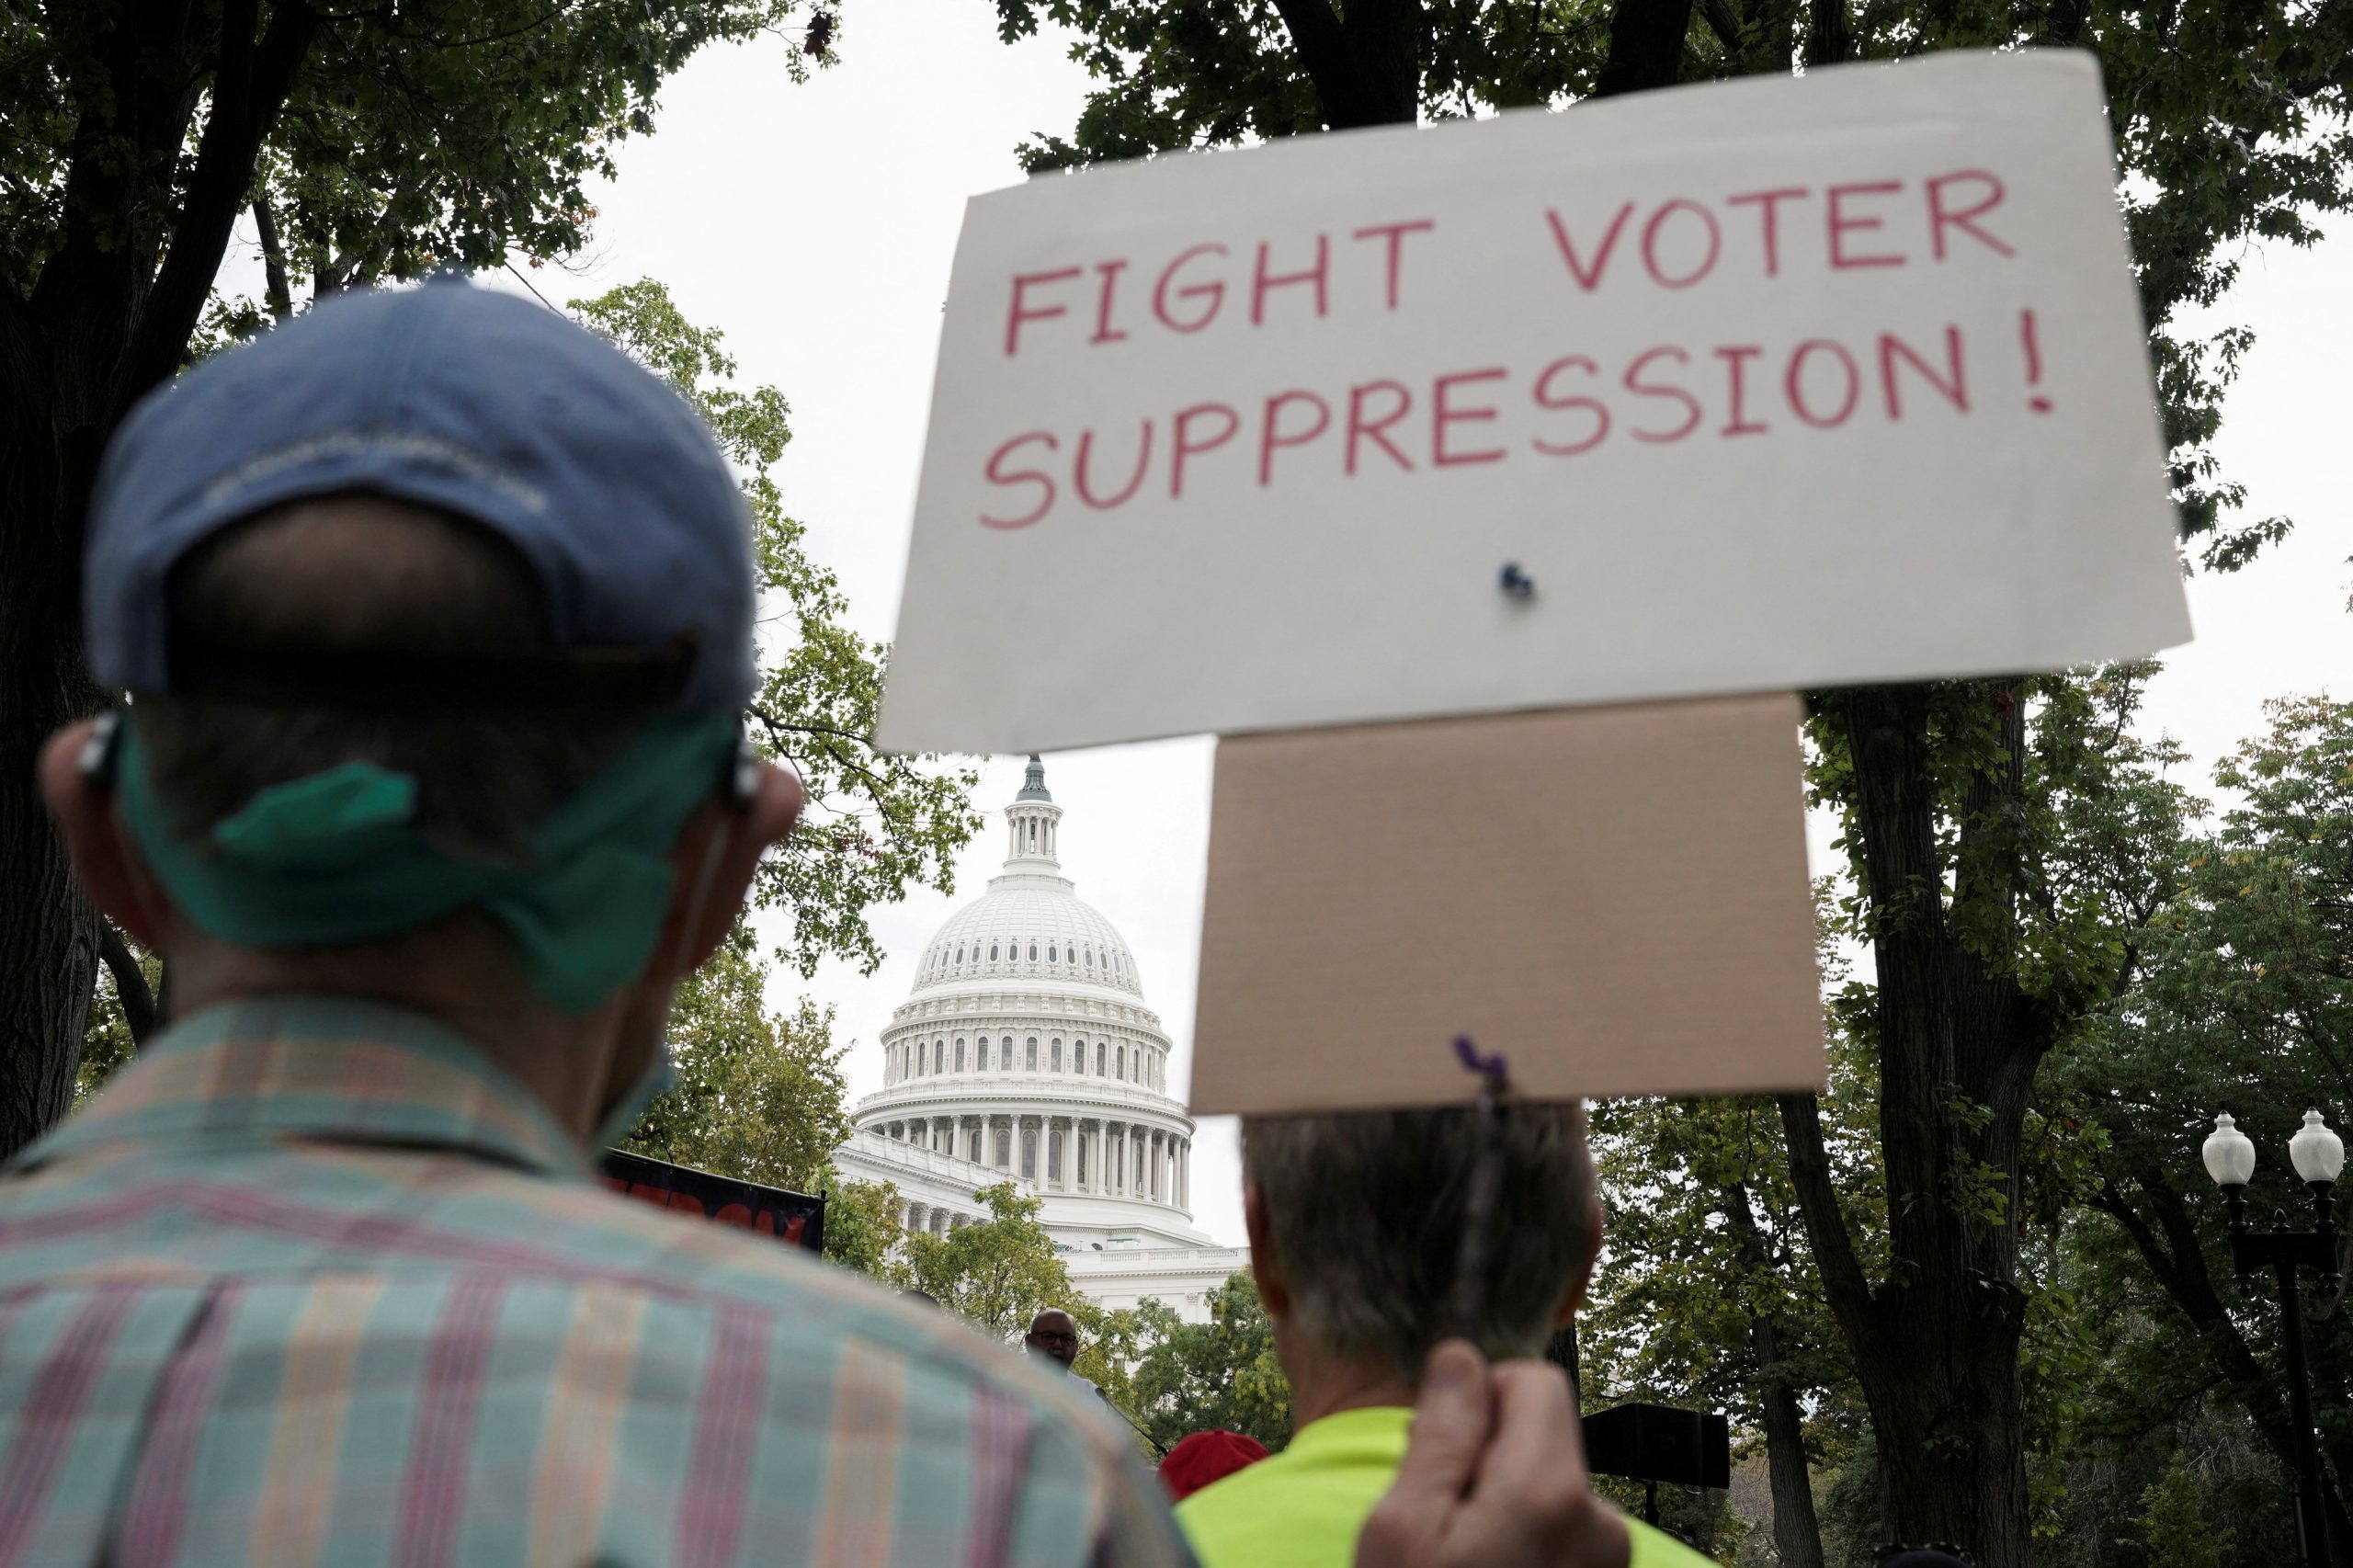 The battles over voting rights, preventing fraud and access to ballots